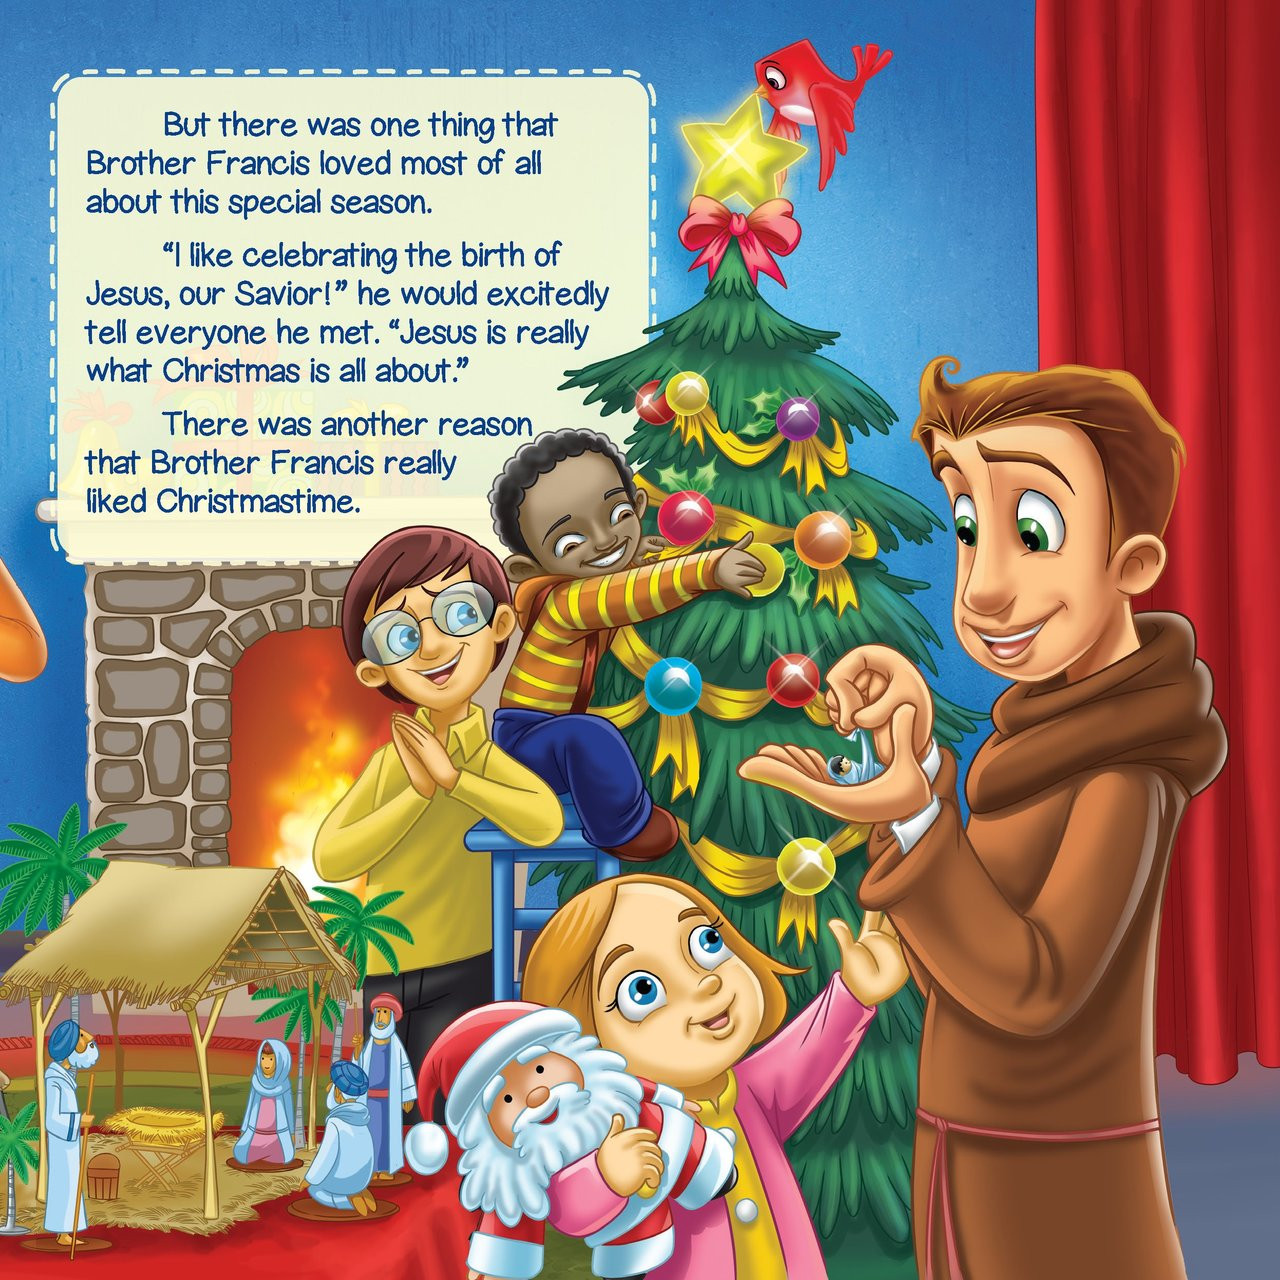 Brother Francis: The Christmas Pageant That Almost Wasn't